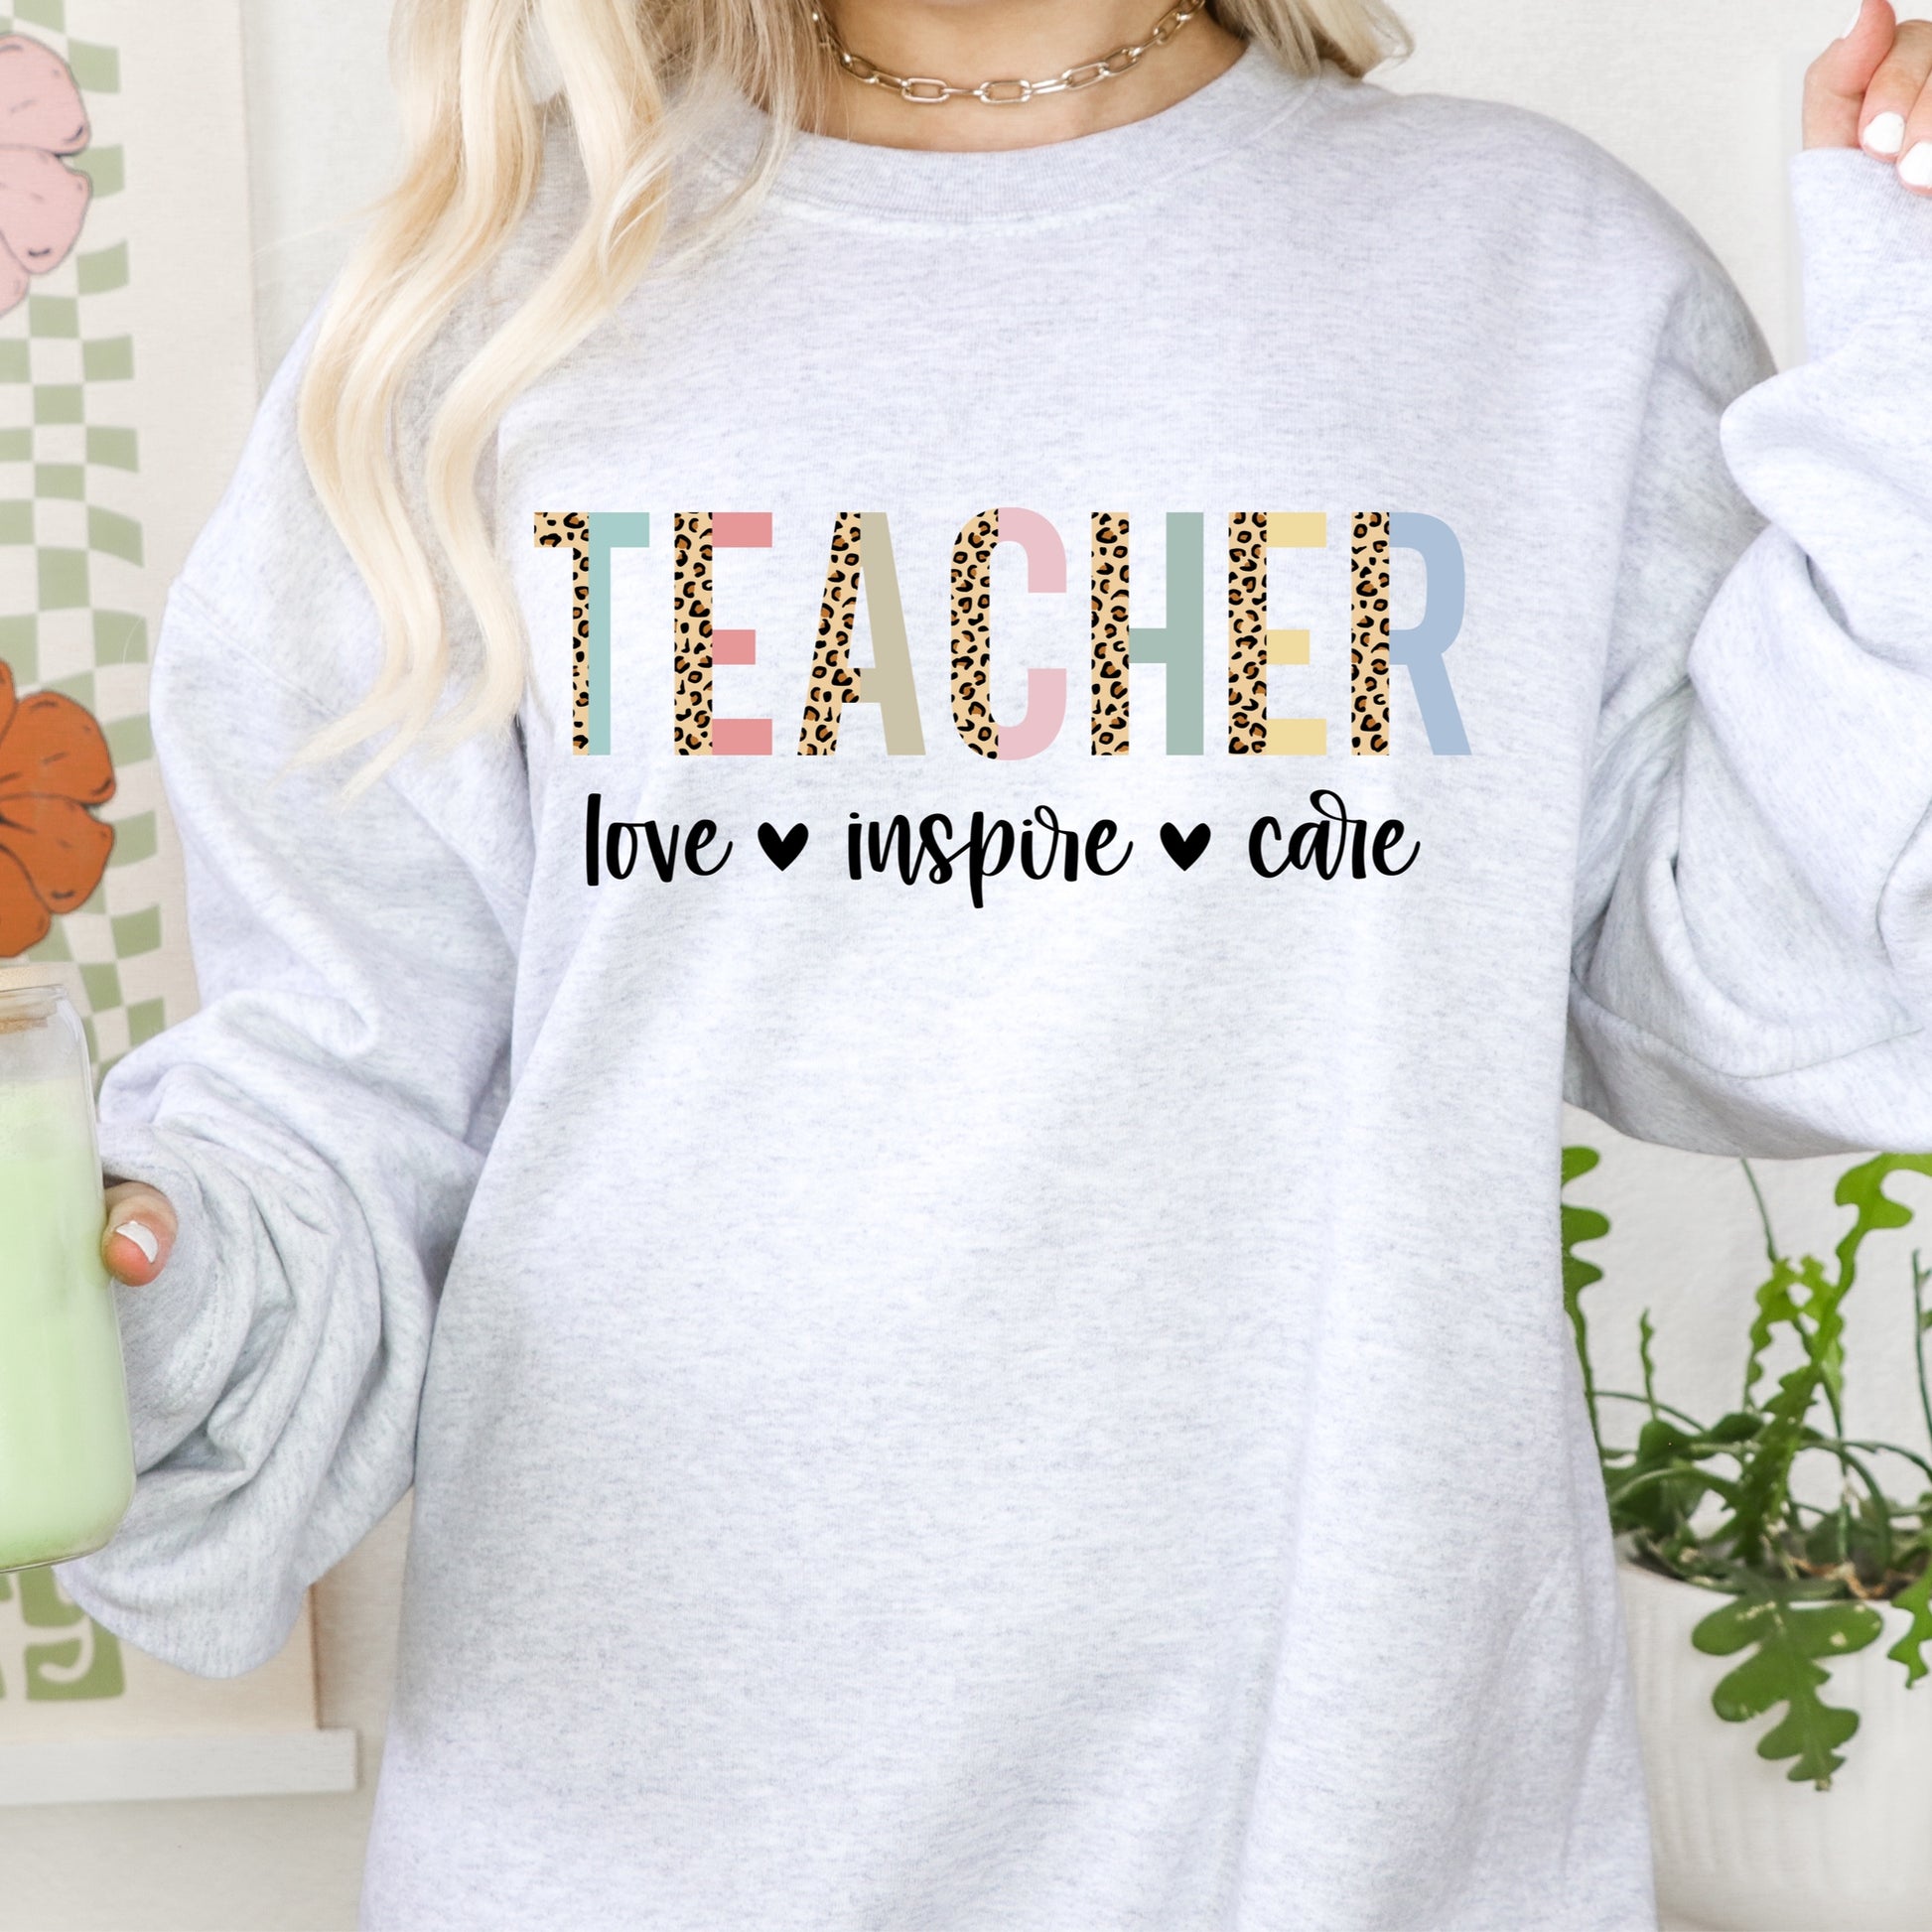 Iron on heat transfer with the words "love", "inspire", and "care", as well as the word "Teacher" with a leopard print design.